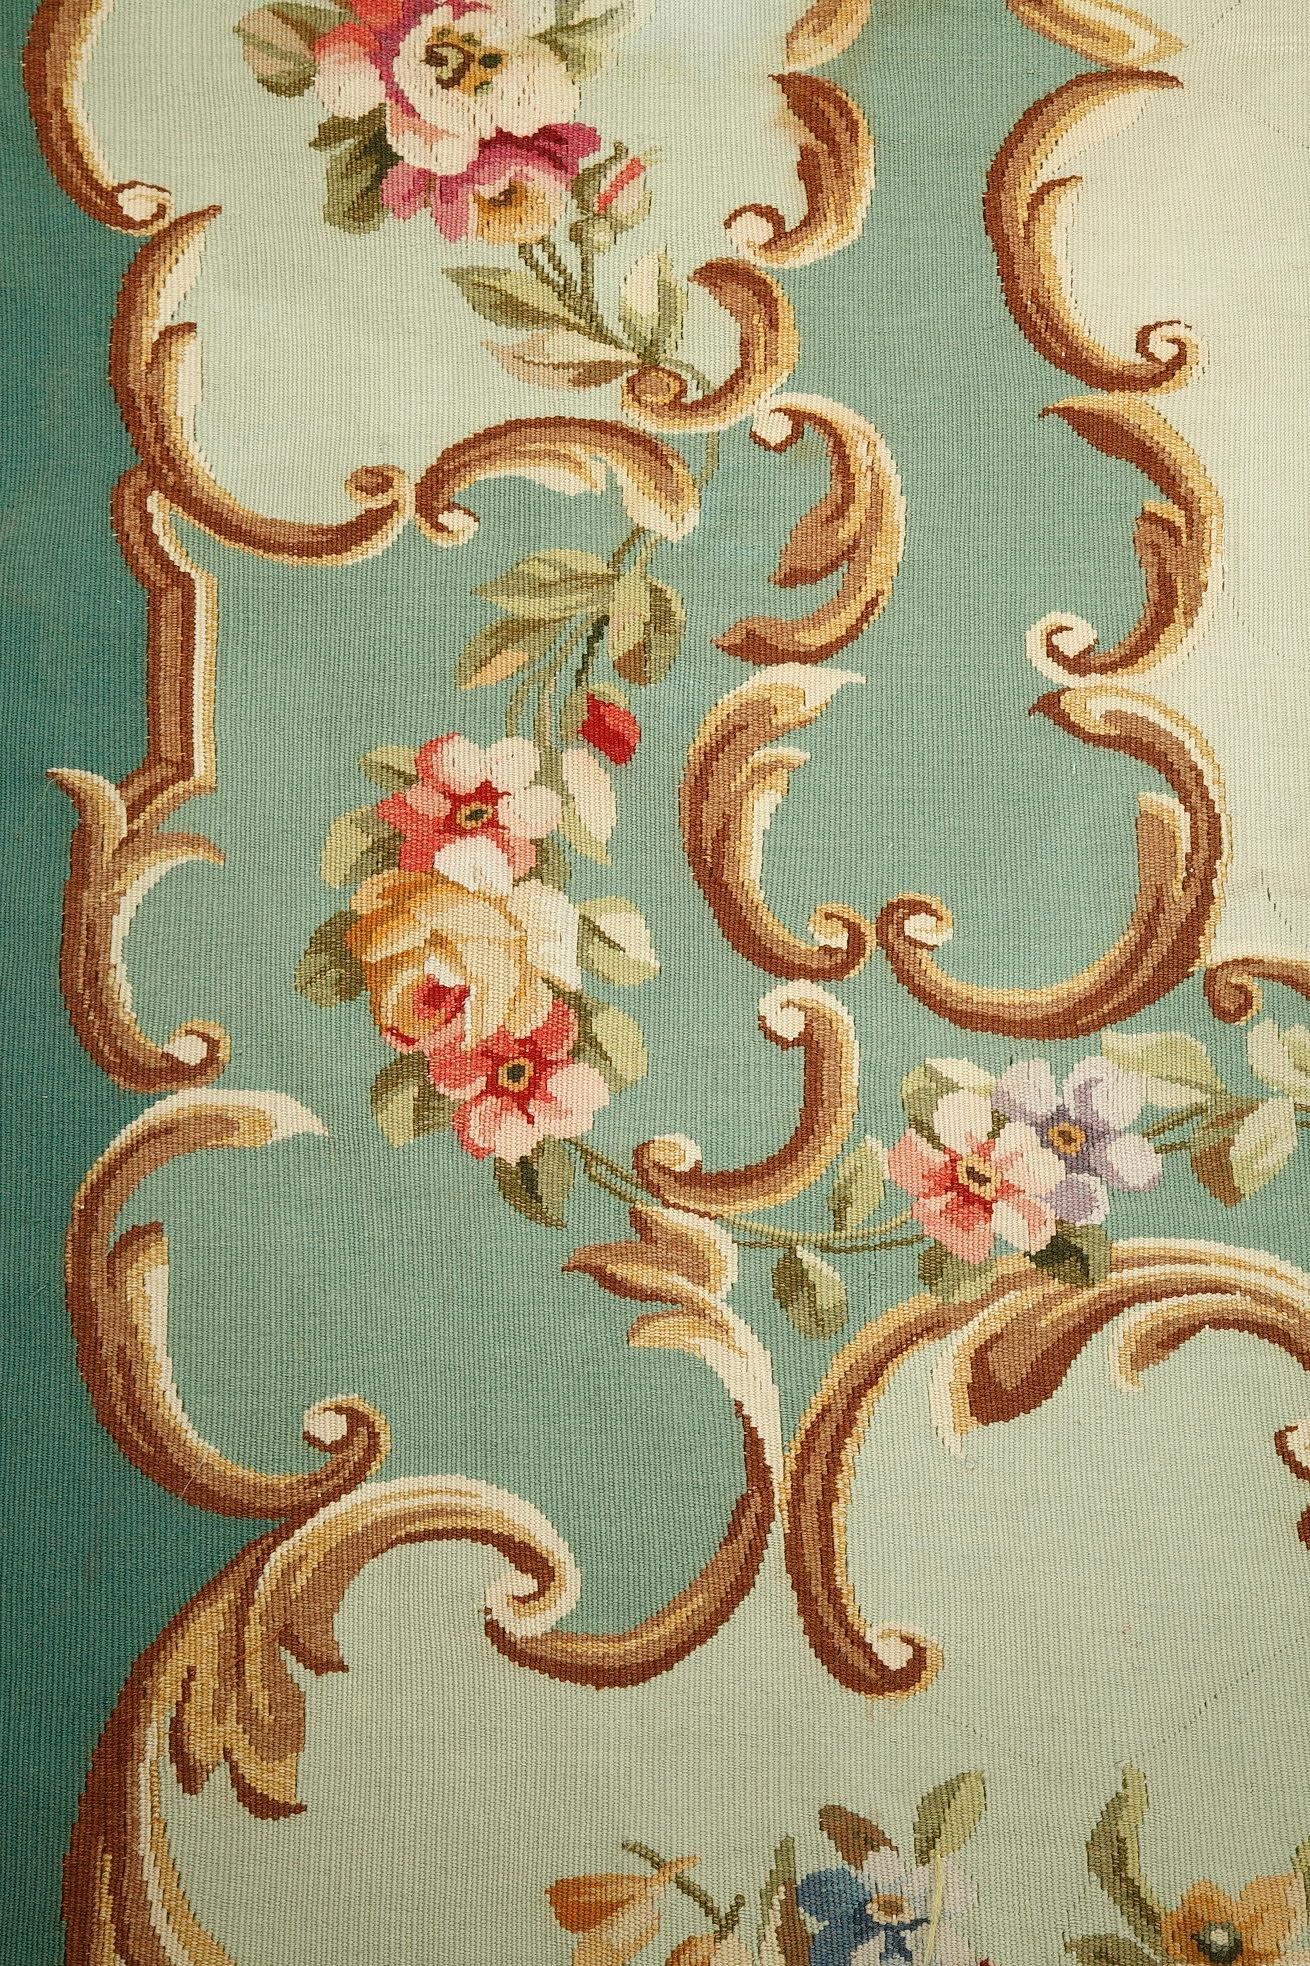 Hand-Woven 20th Century Aubusson Rug by Maxime Fougerol